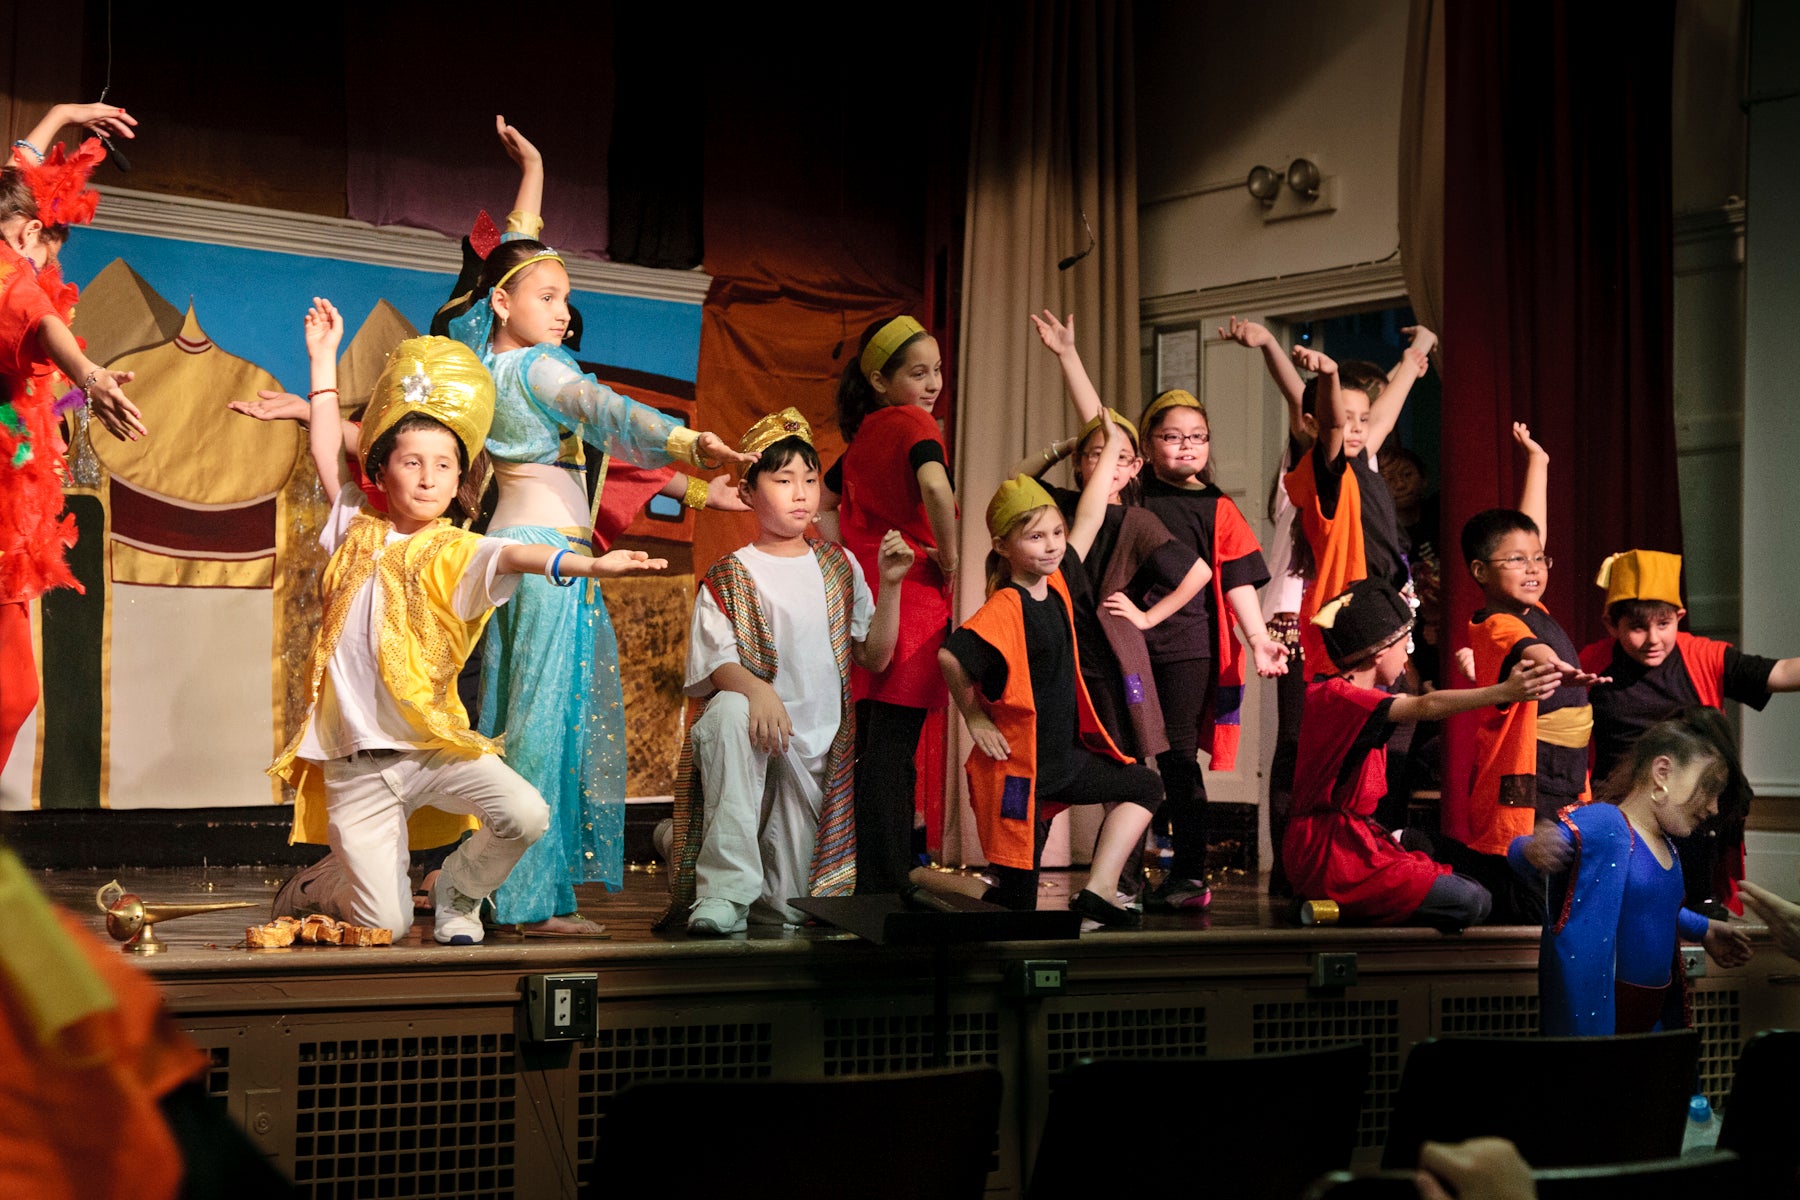 Children on stage strike a pose at the end of their play performance.